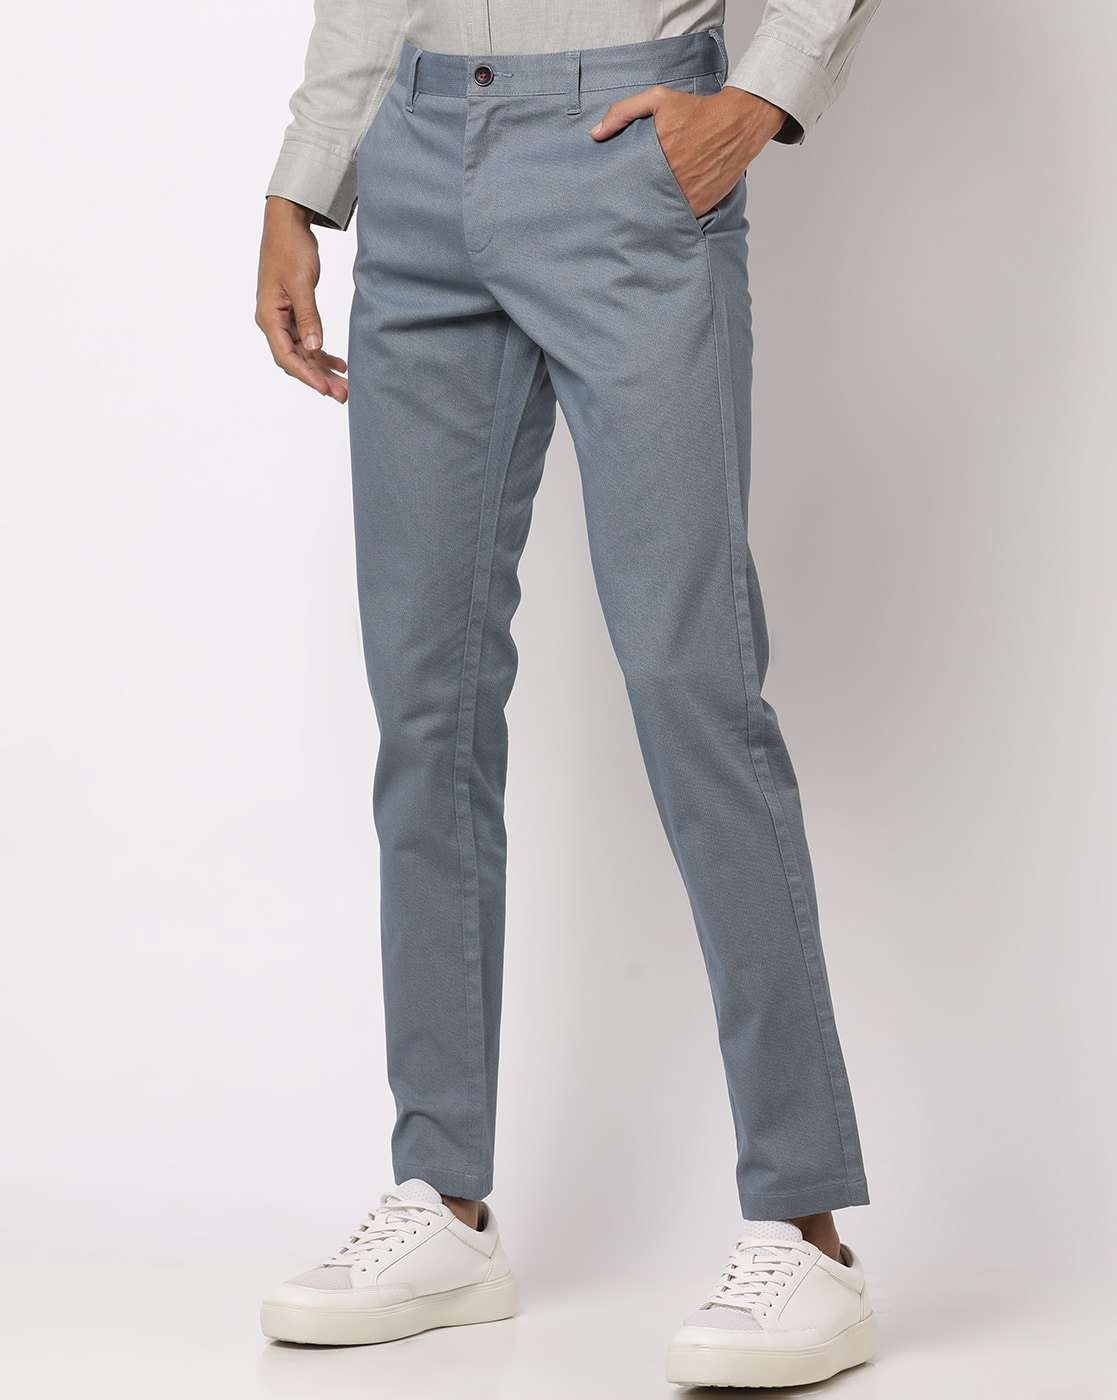 Imperial Shop Online Trousers - Men's clothing Official website